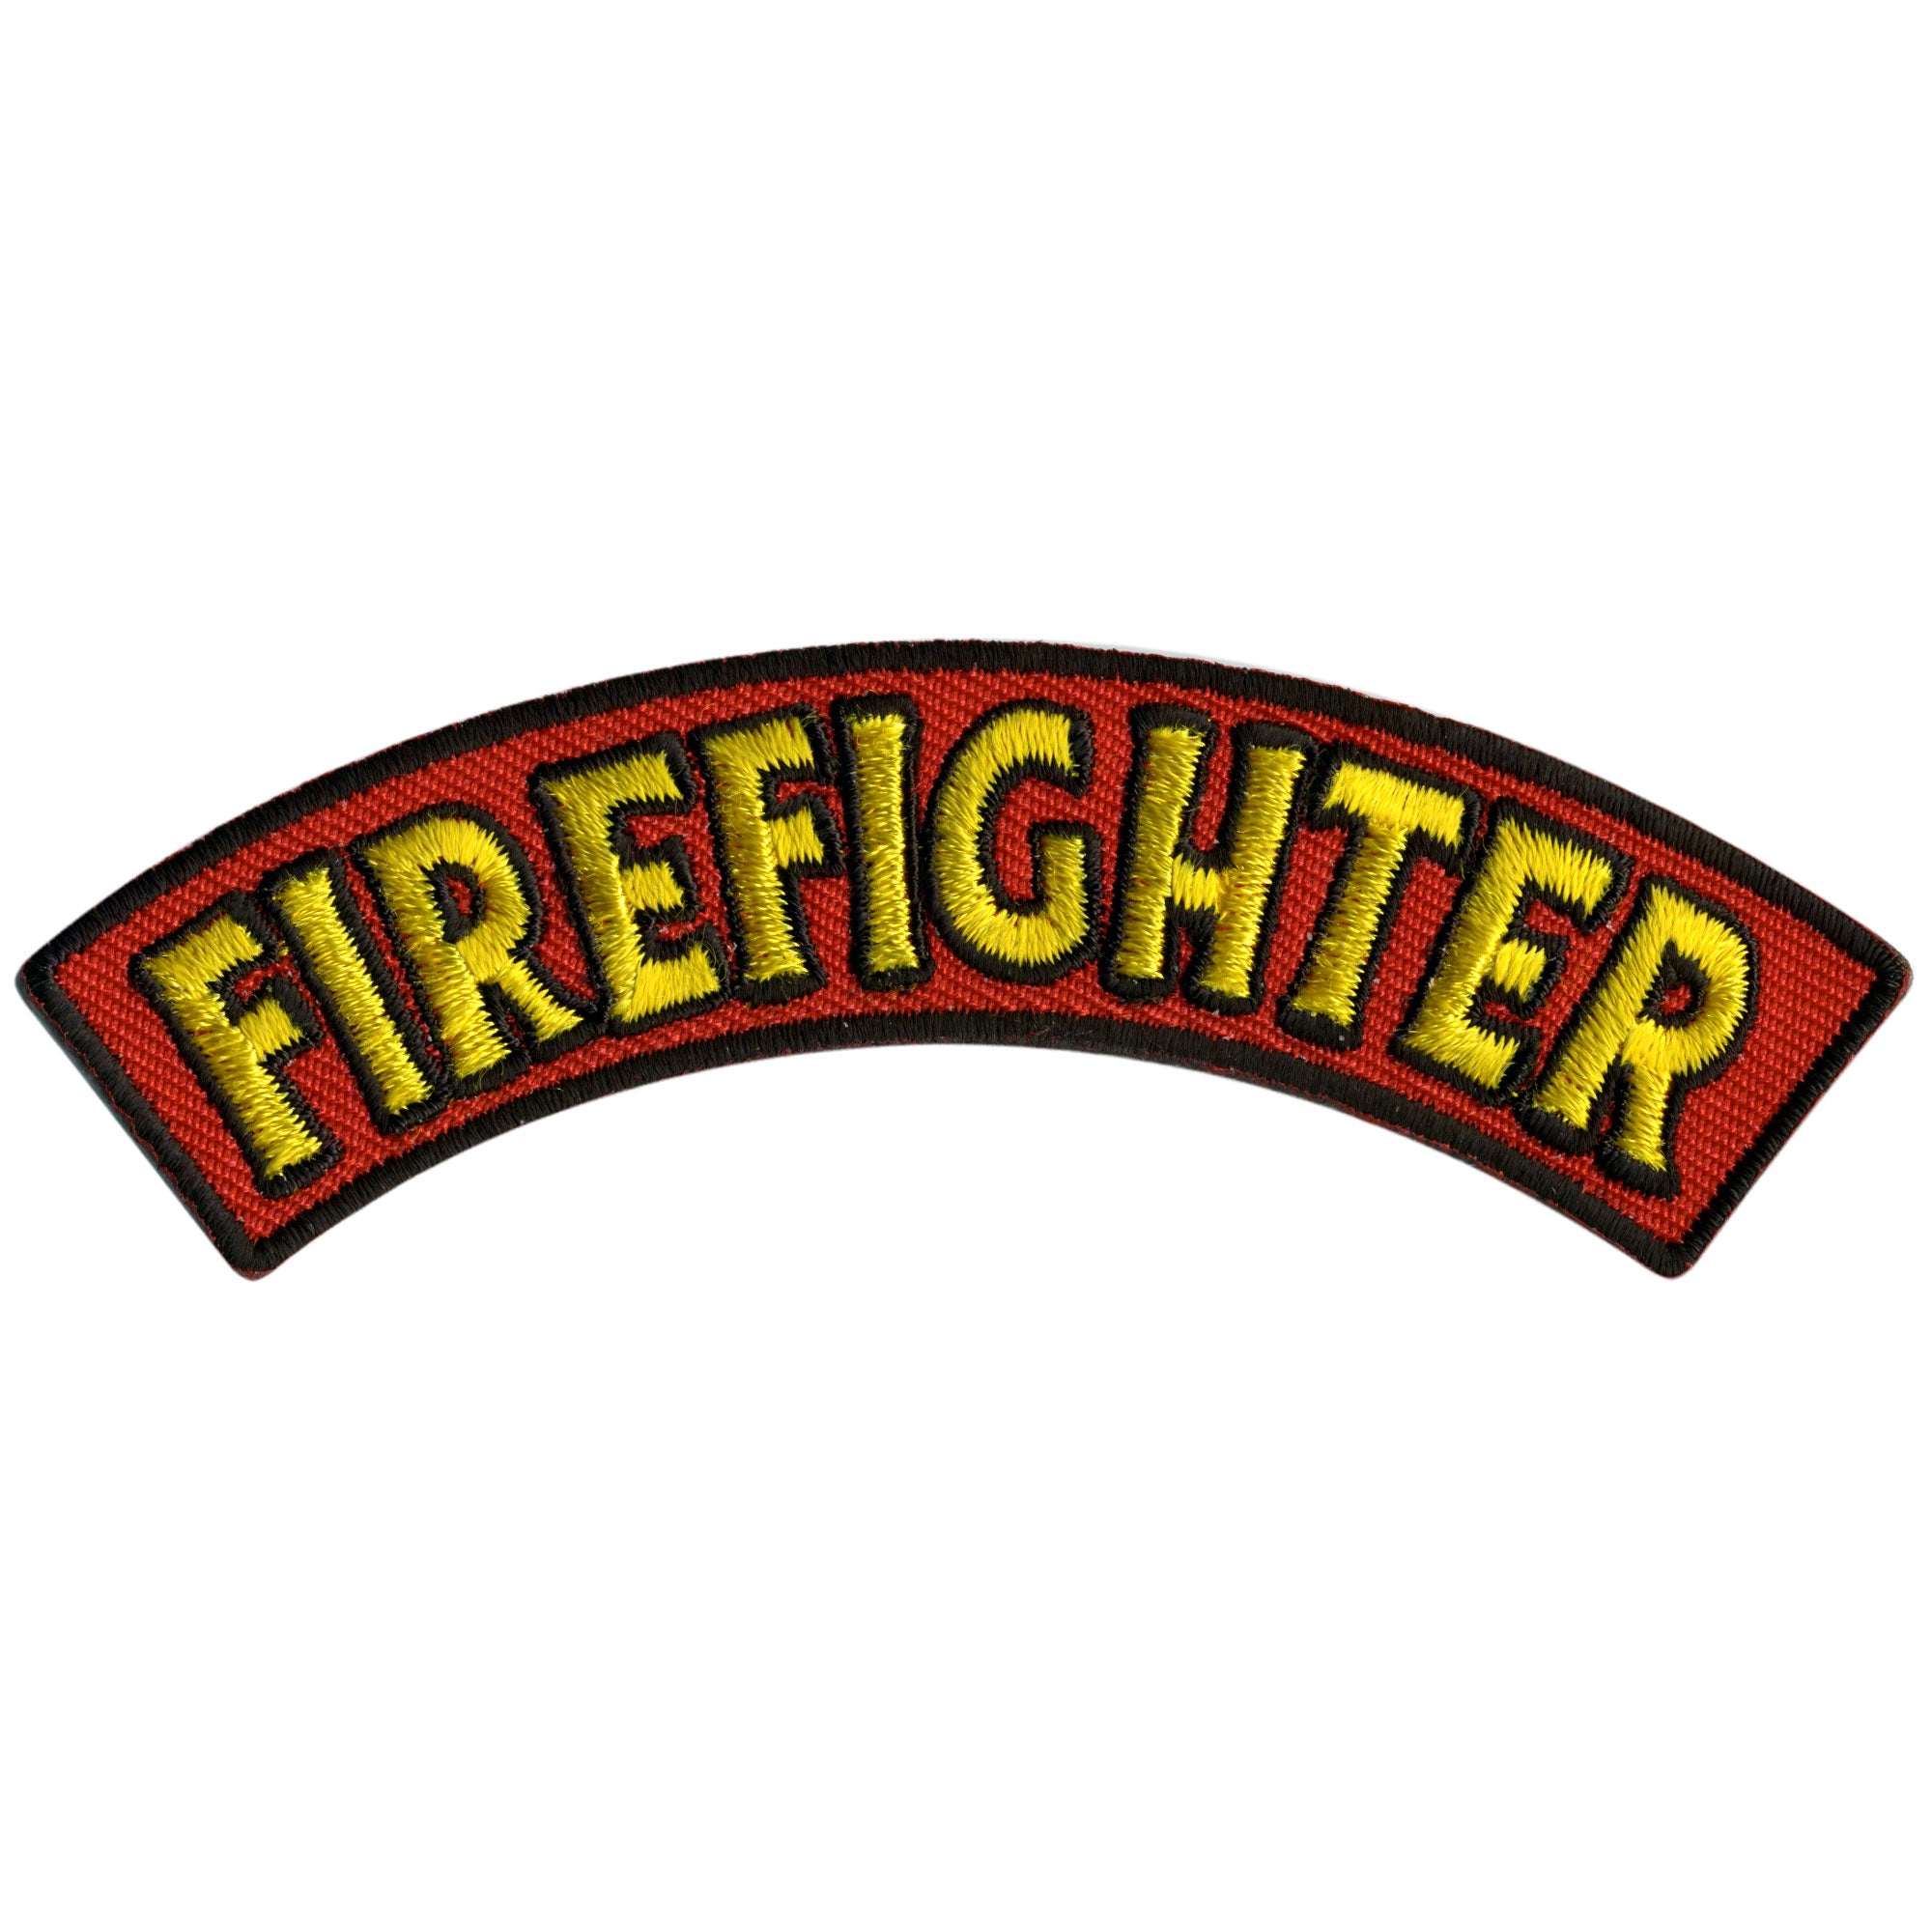 Hot Leathers Firefighter 4” X 1” Top Rocker Patch